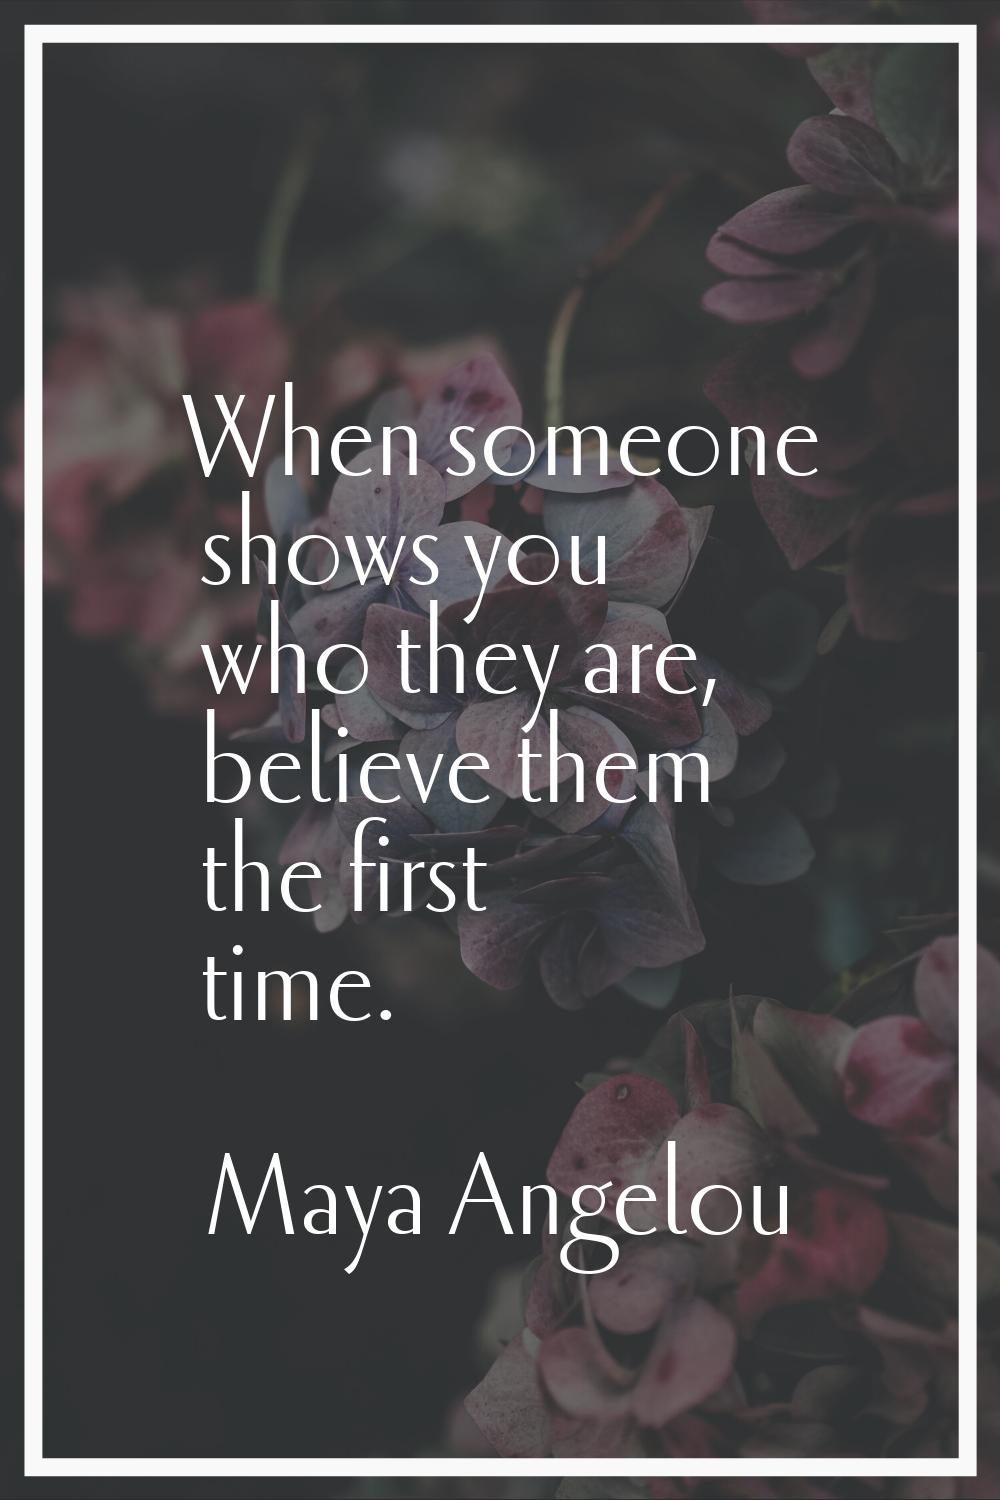 When someone shows you who they are, believe them the first time.